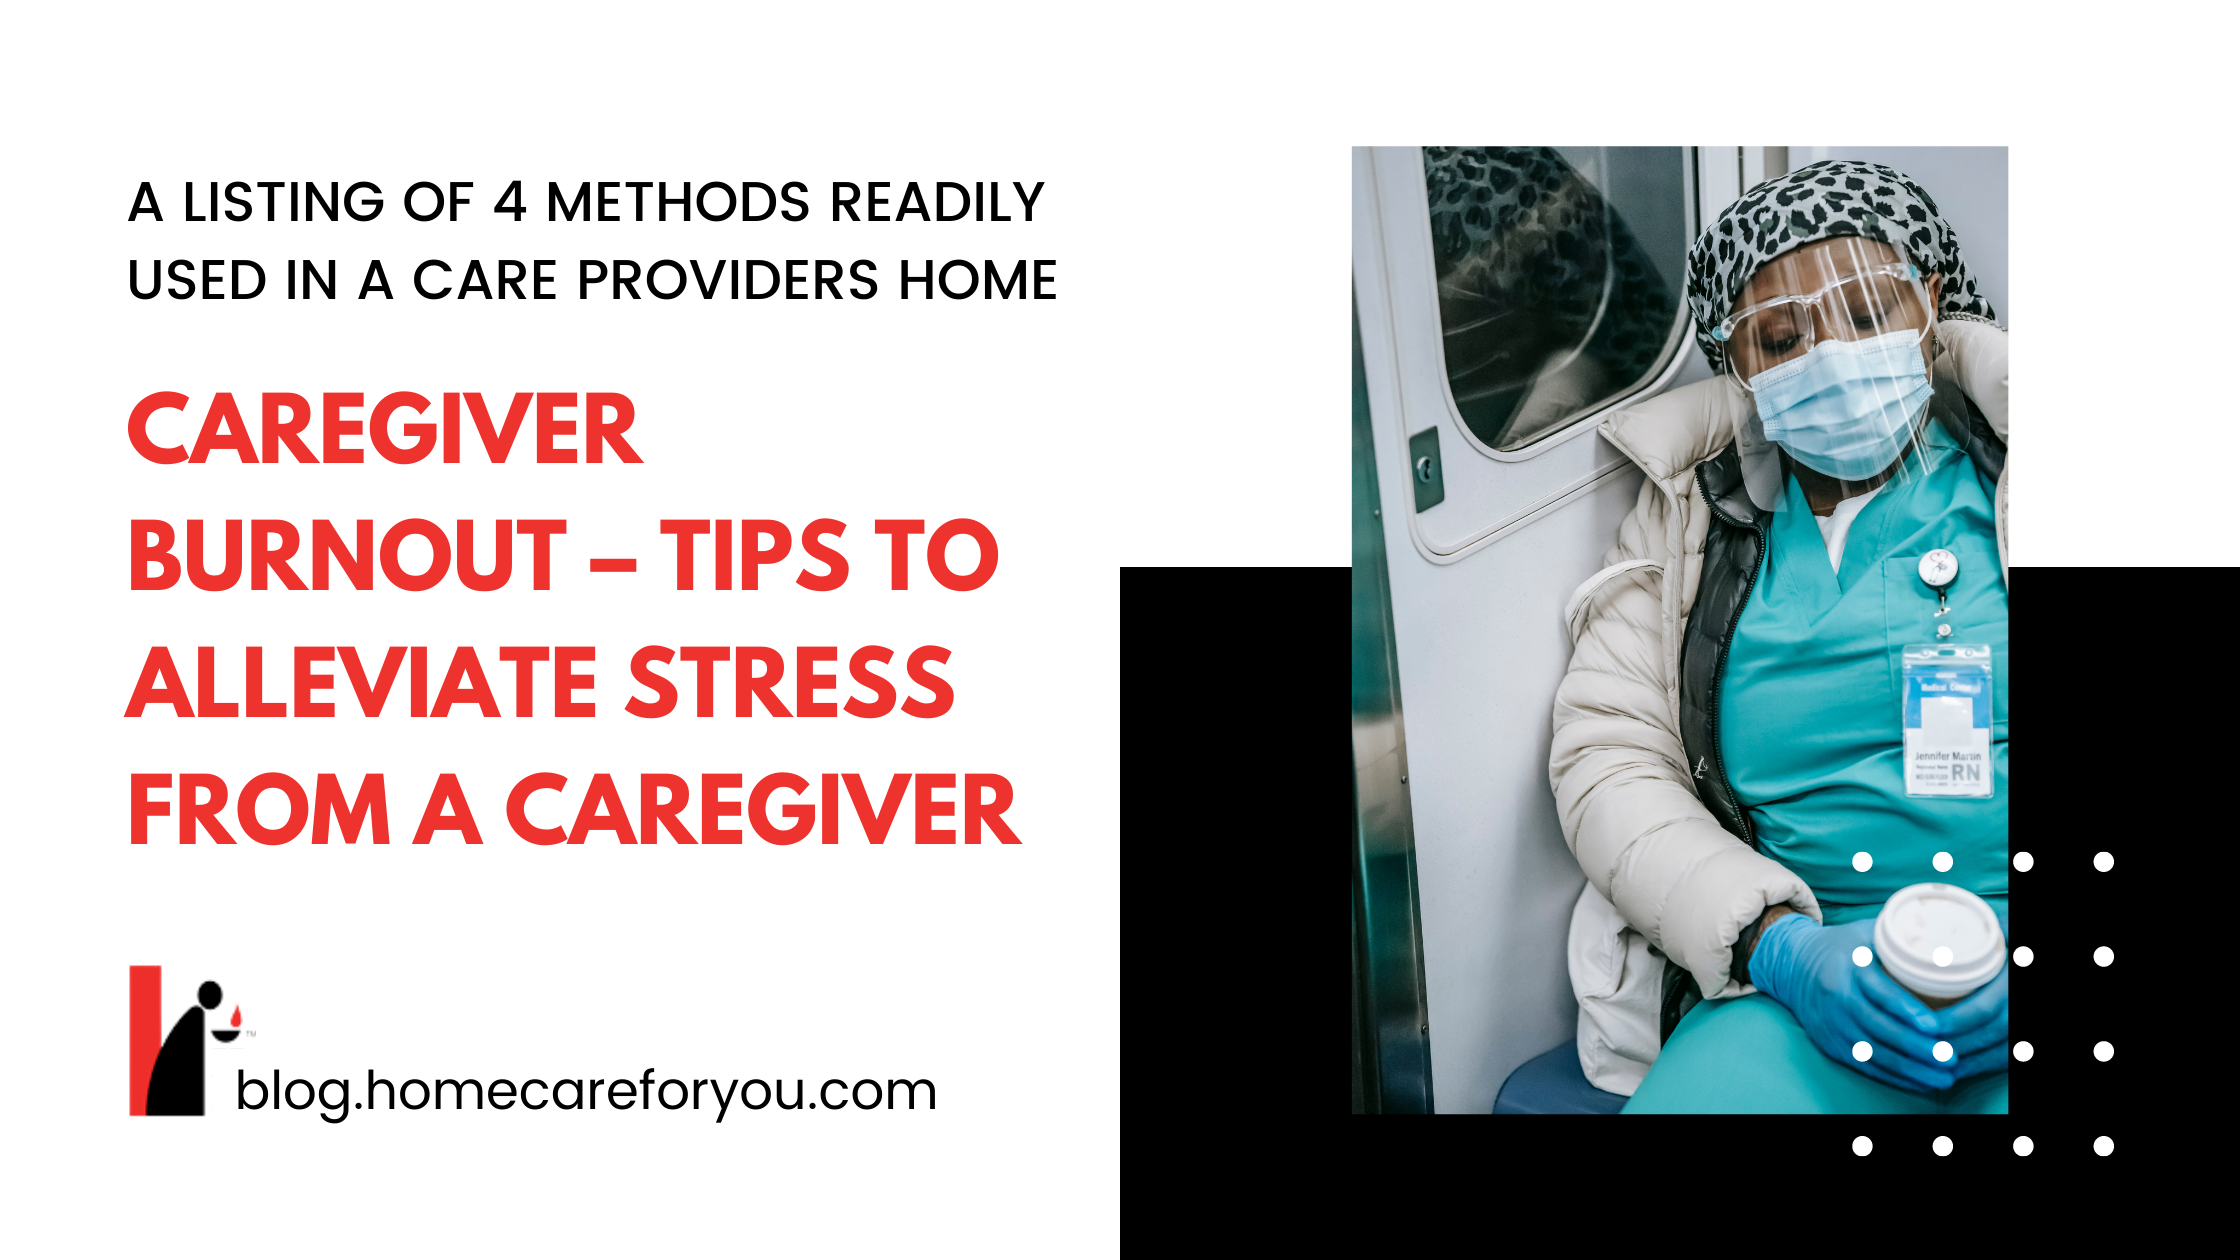 Caregiver Burnout – Tips To Alleviate Stress From A Caregiver